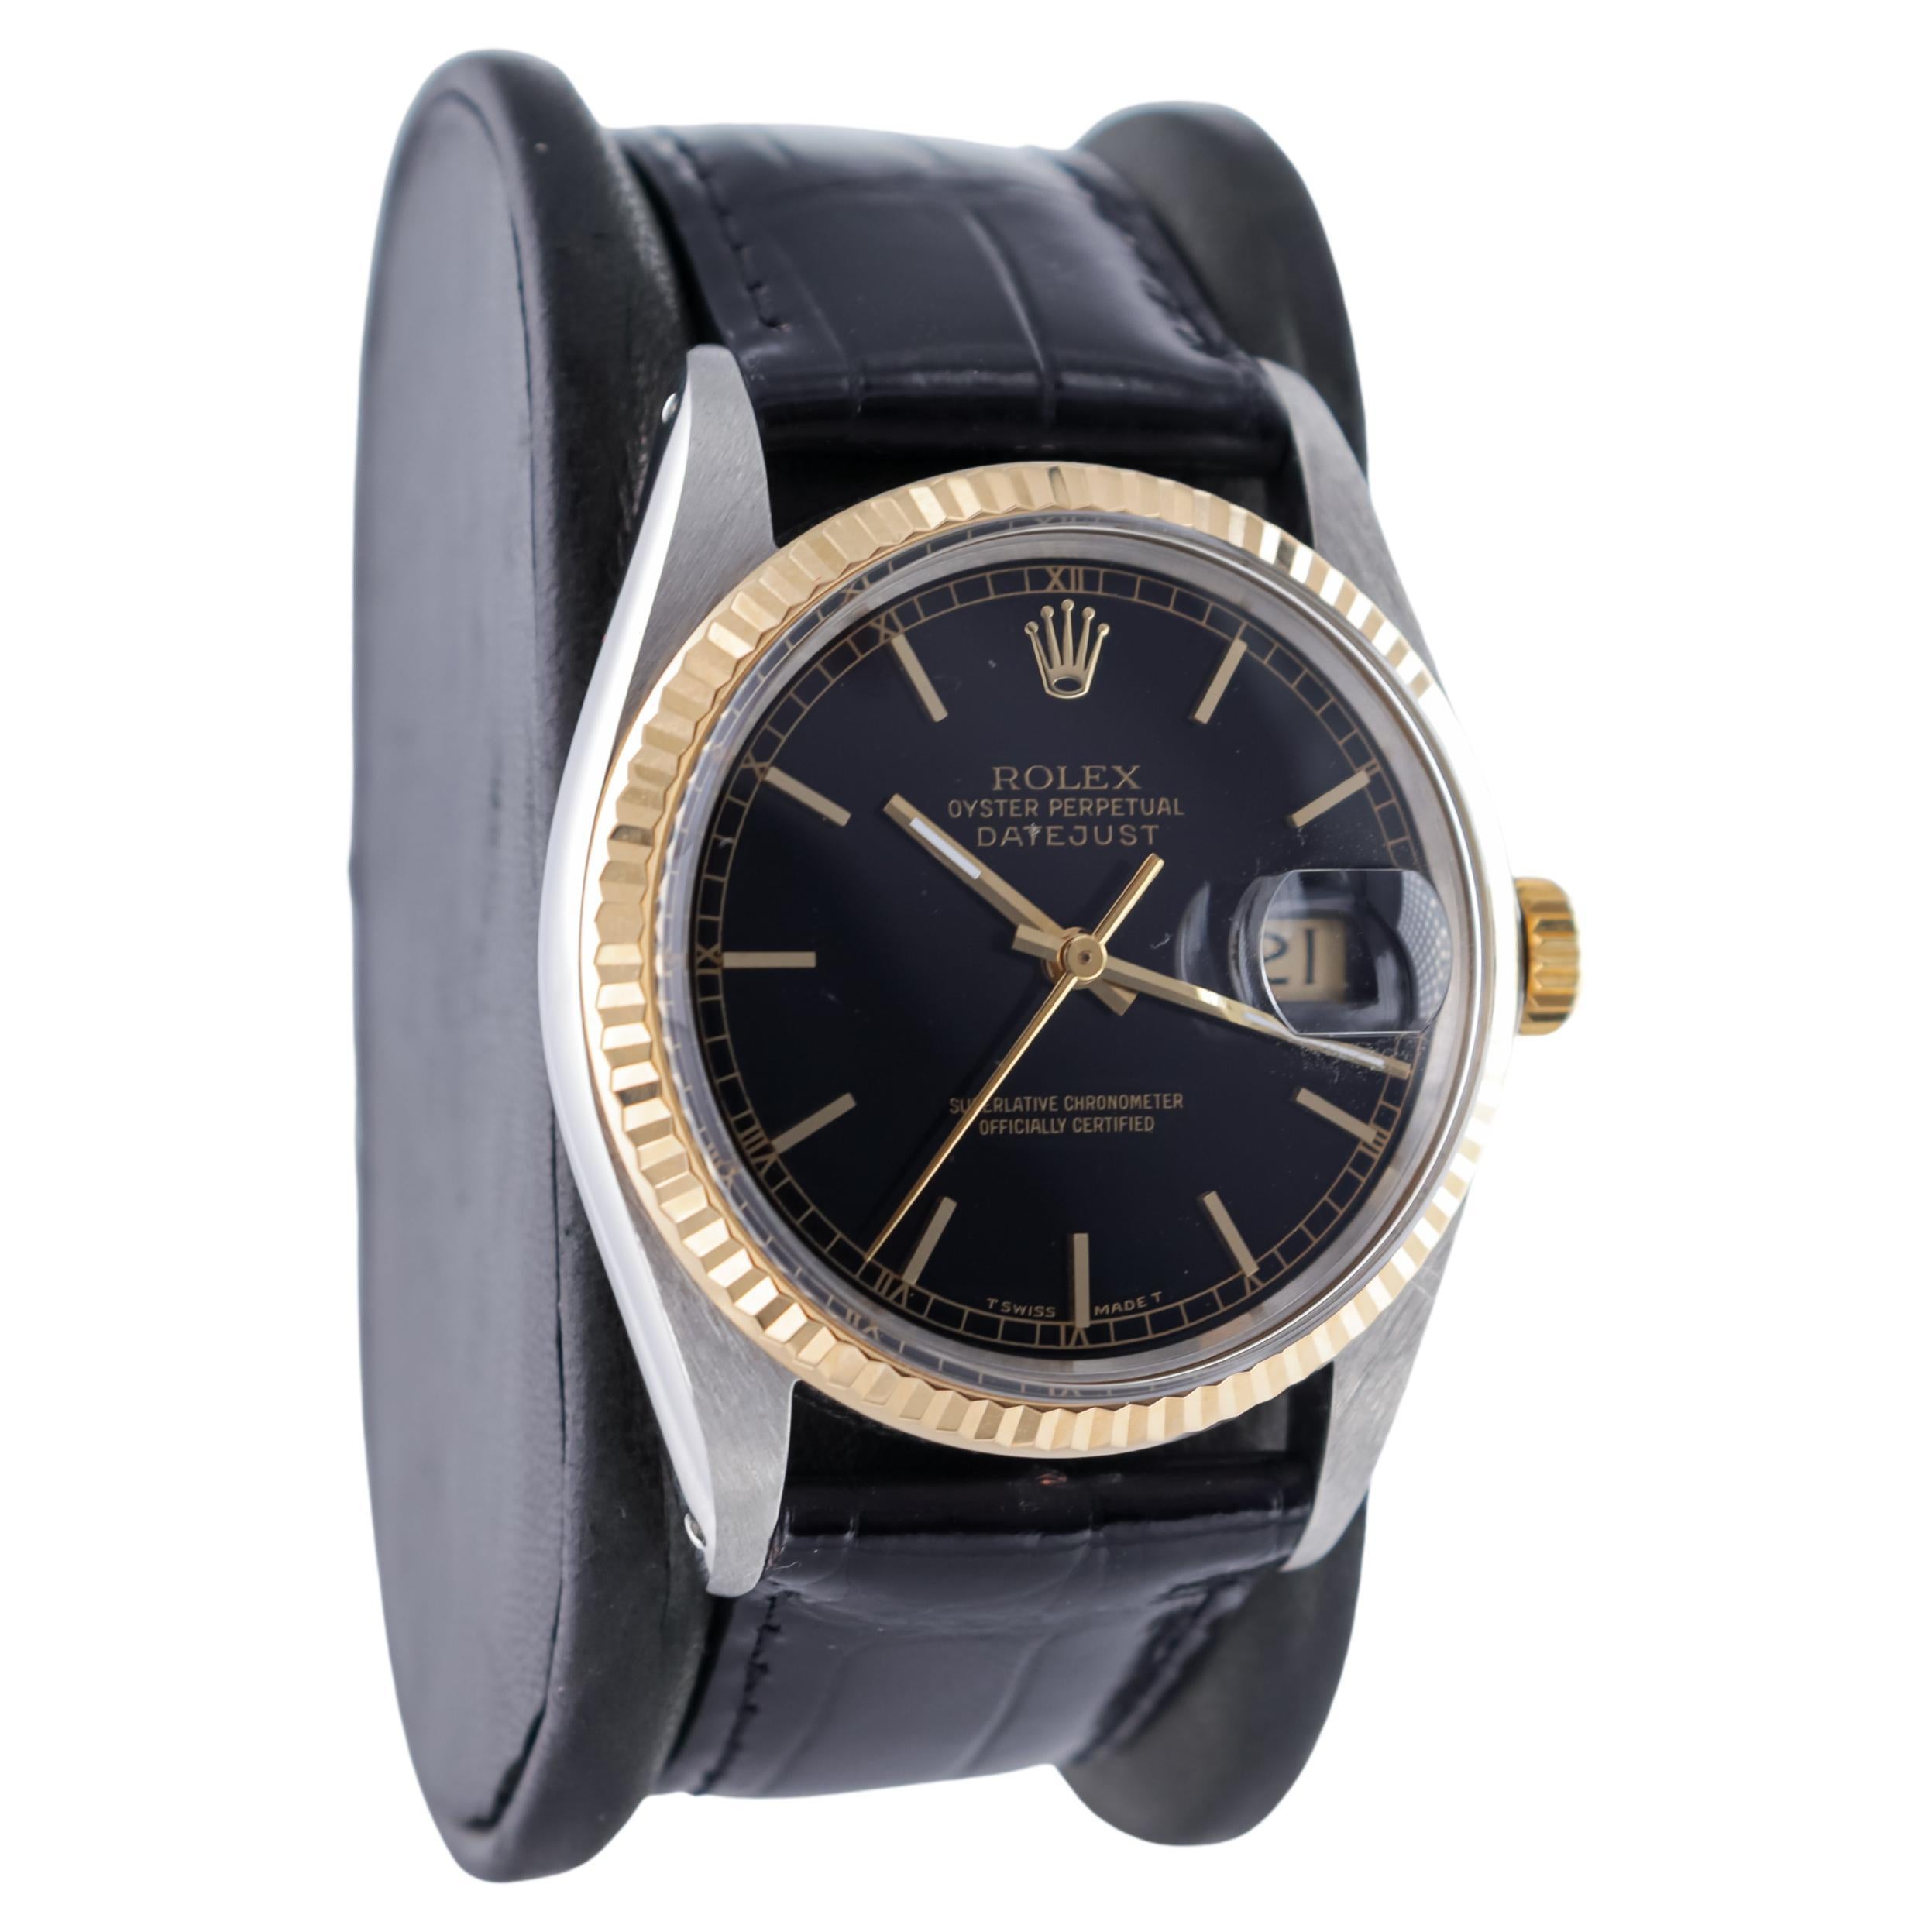 FACTORY / HOUSE: Rolex Watch Company
STYLE / REFERENCE: Oyster Perpetual Datejust / Reference 1600
METAL / MATERIAL: Two Tone Steel and 18Kt. Gold
CIRCA / YEAR: 1987
DIMENSIONS / SIZE: Length 44mm X Diameter 36mm
MOVEMENT / CALIBER: Perpetual